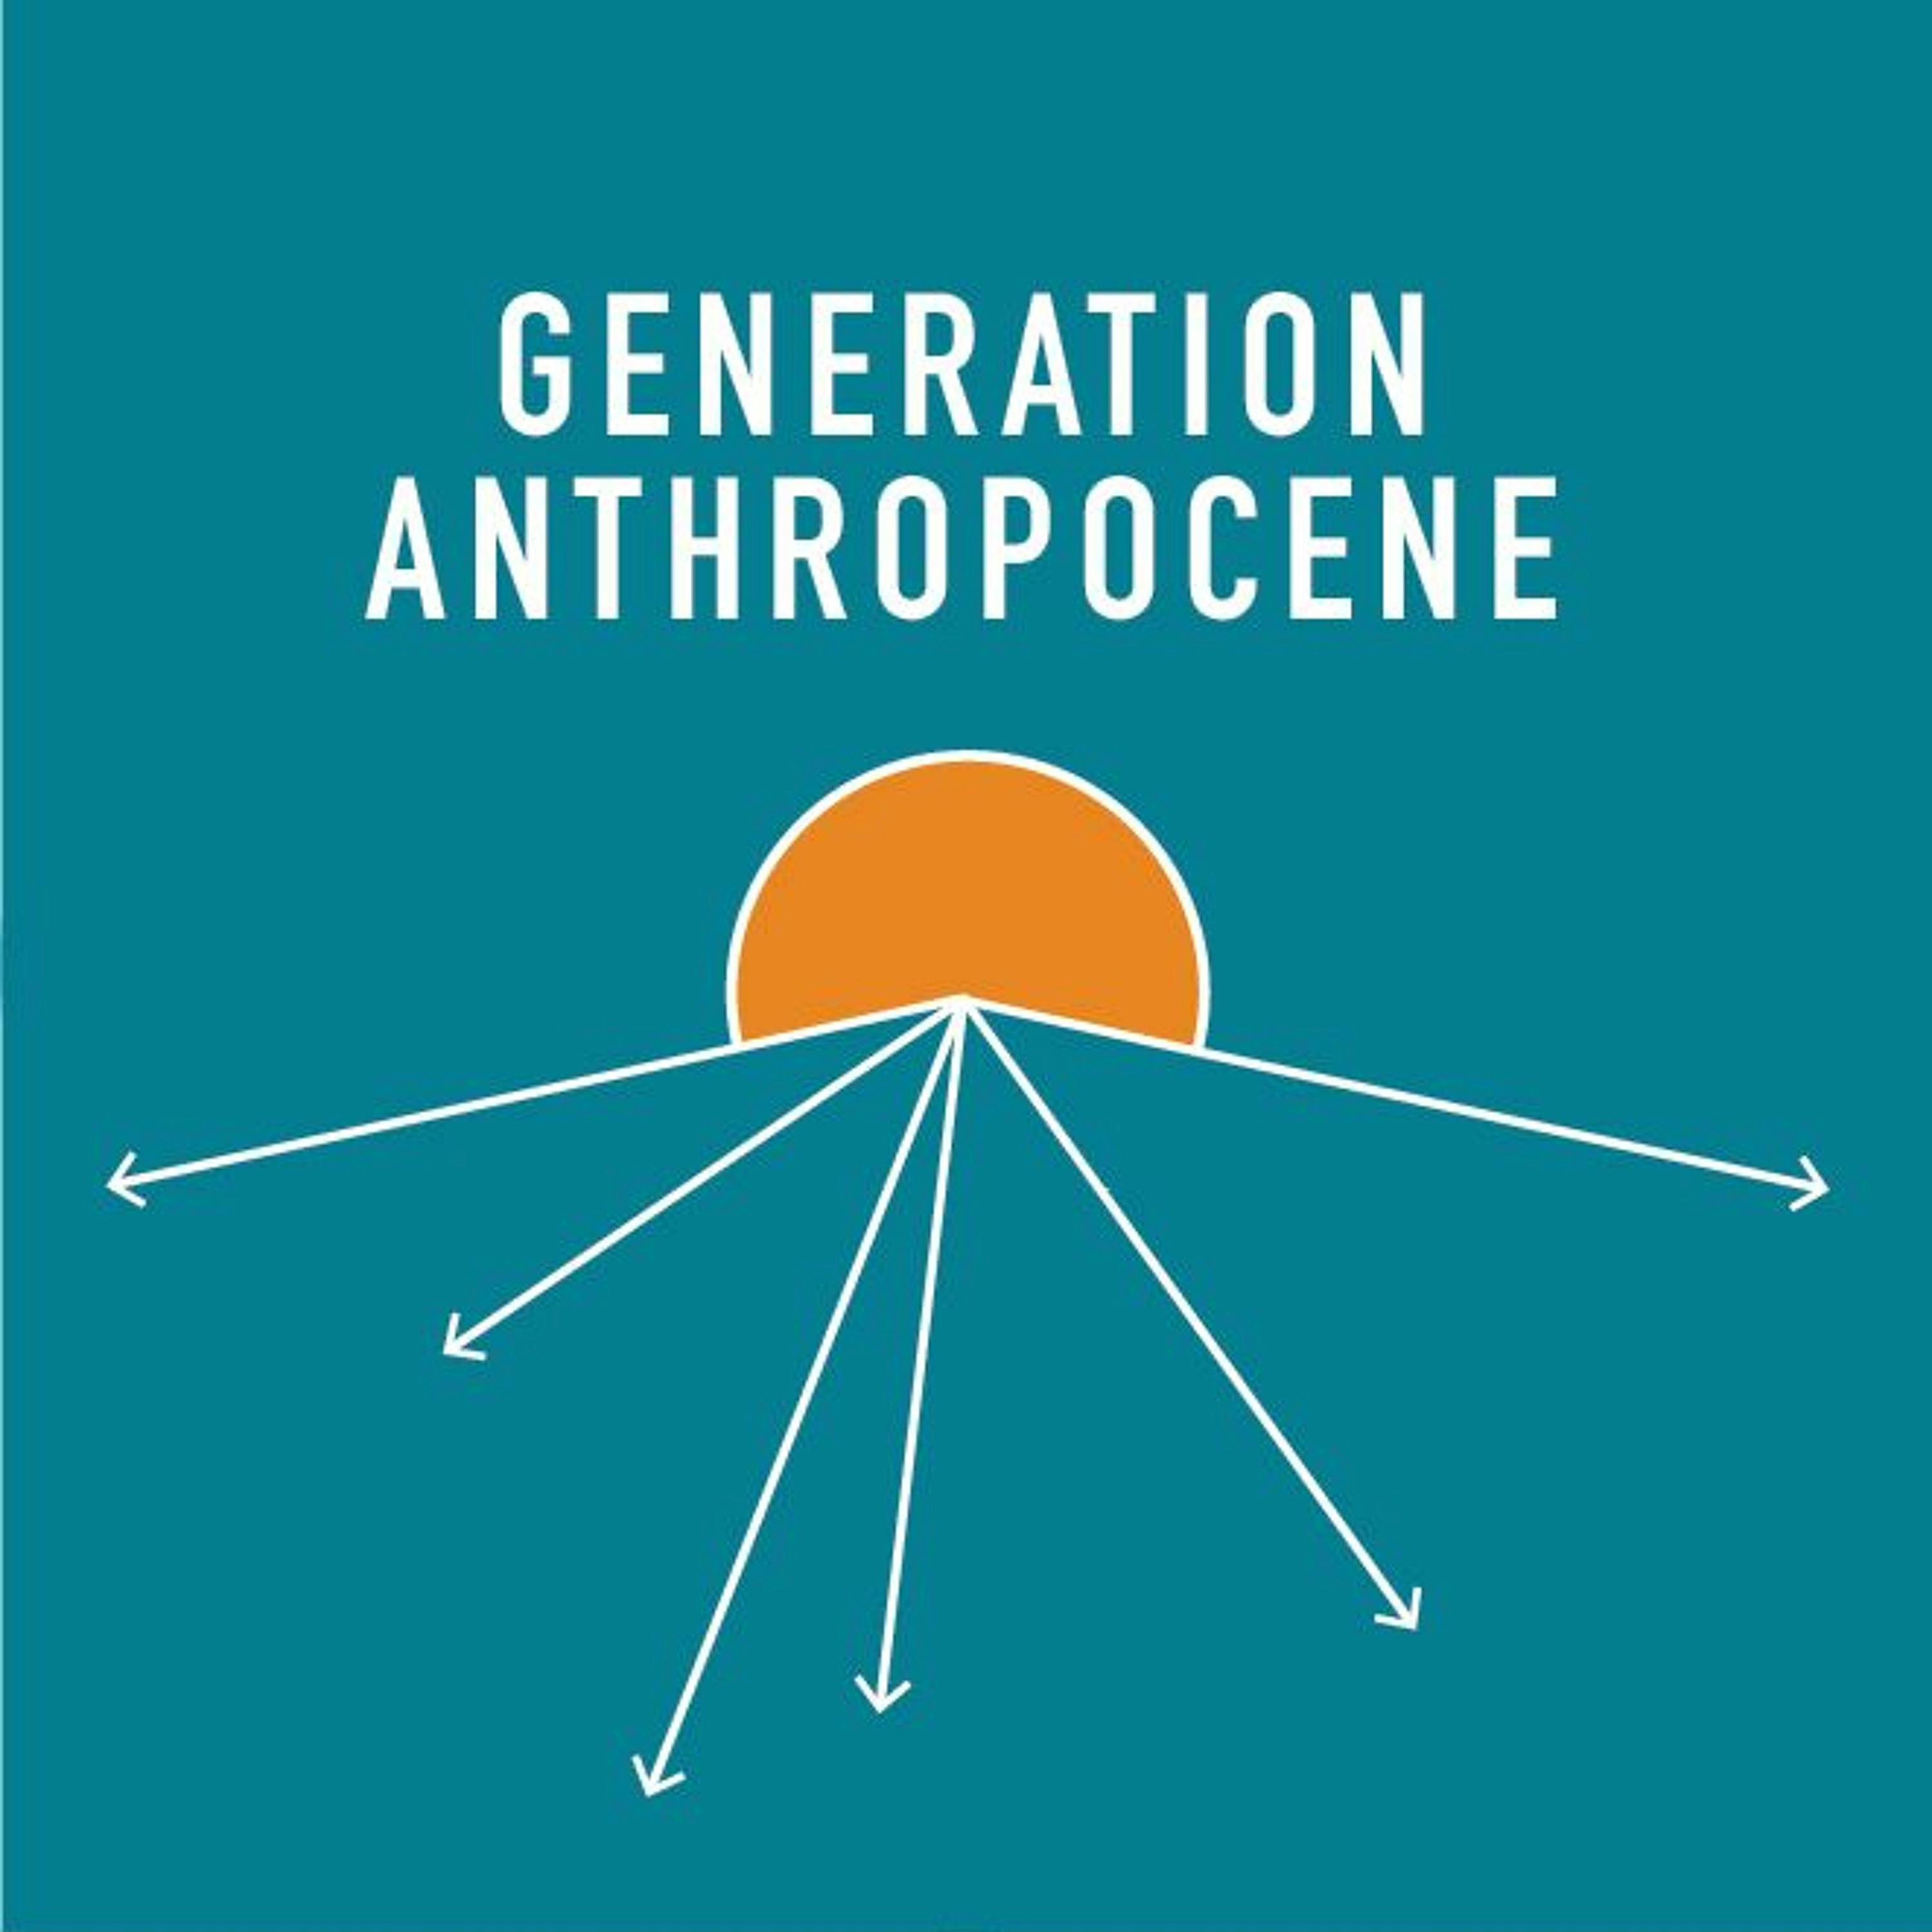 Zombies, Covid-19, and The Anthropocene